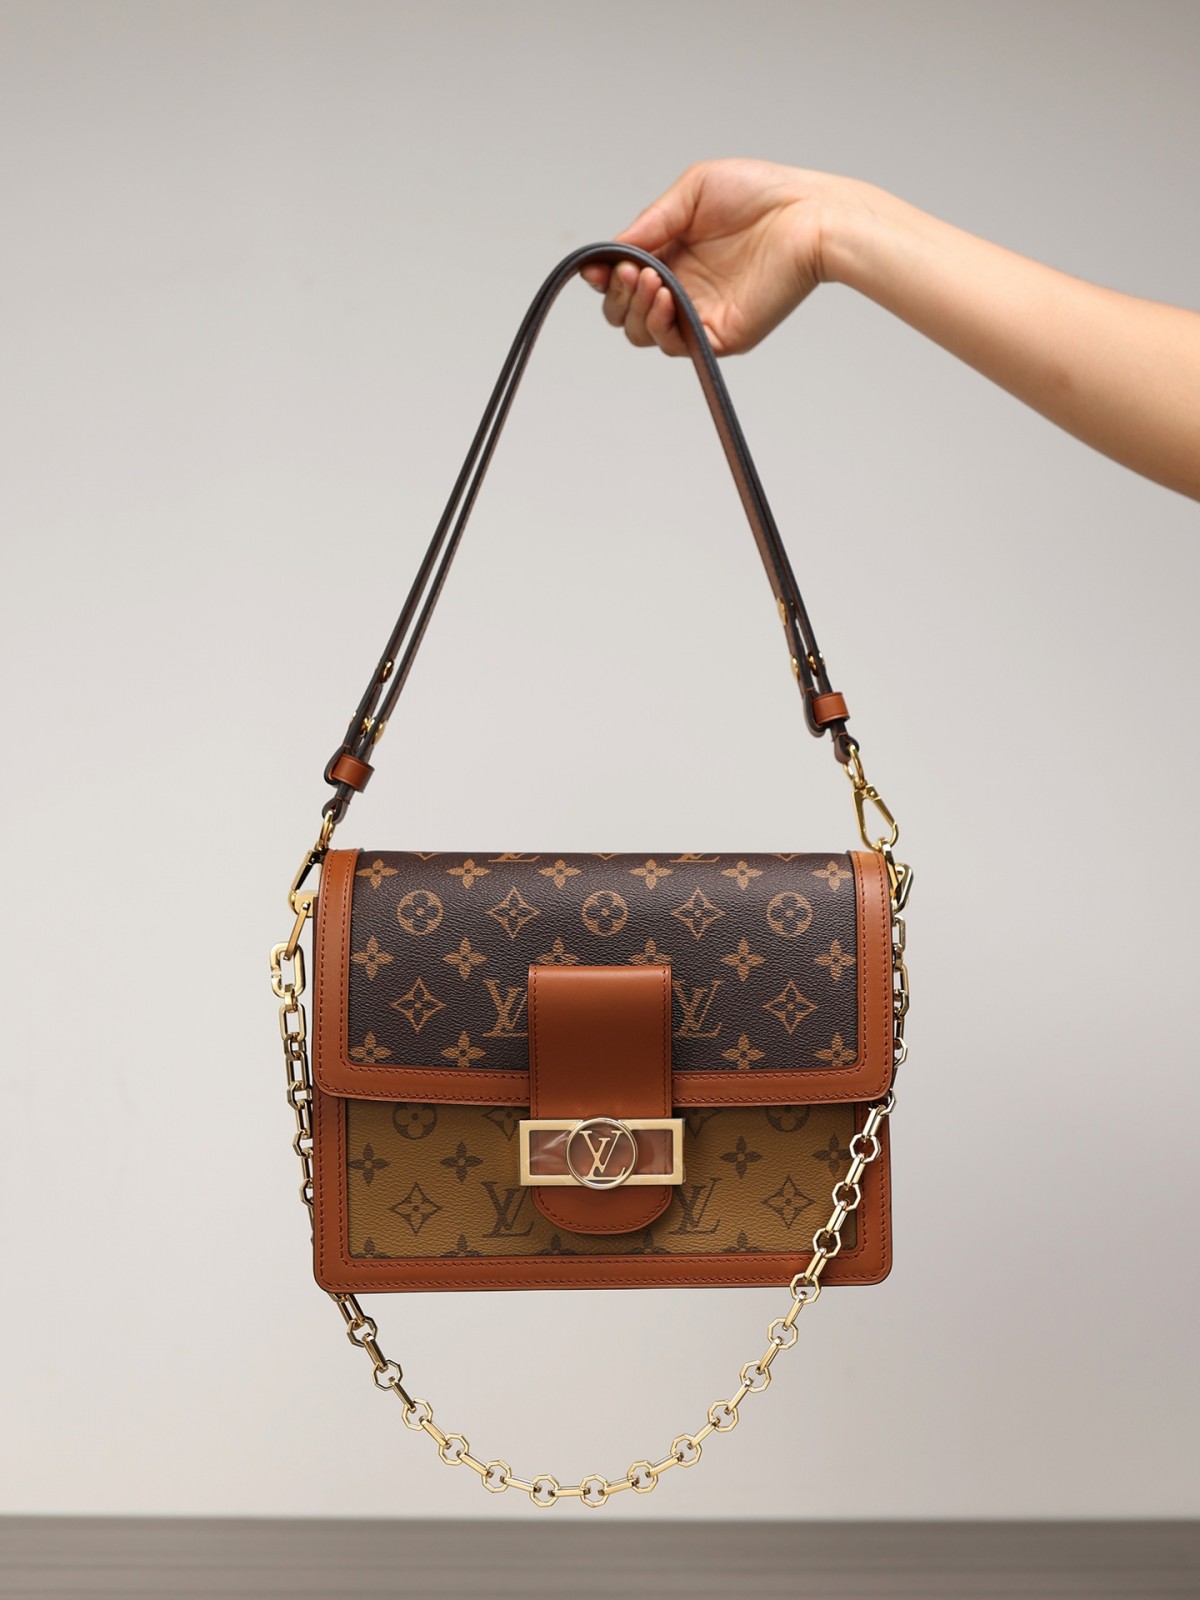 How good quality is a Shebag LV Dauphine bag（2023 Hardware updated）-Best Quality Fake Louis Vuitton Bag Online Store, Replica designer bag ru